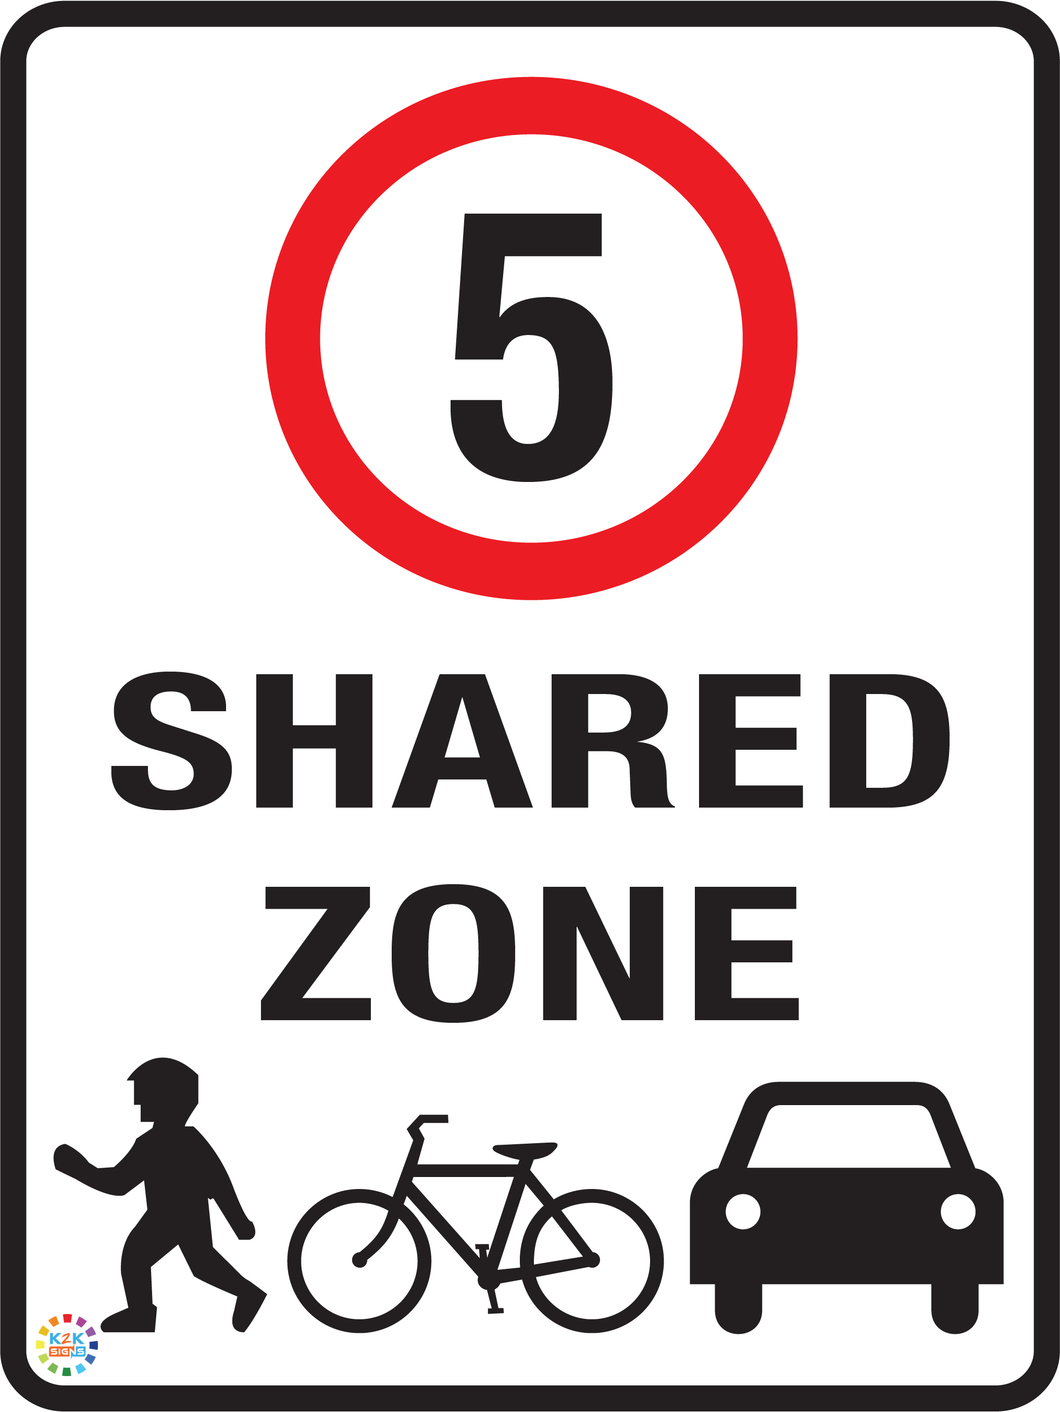 Shared Zone - Speed Limit 5 Sign